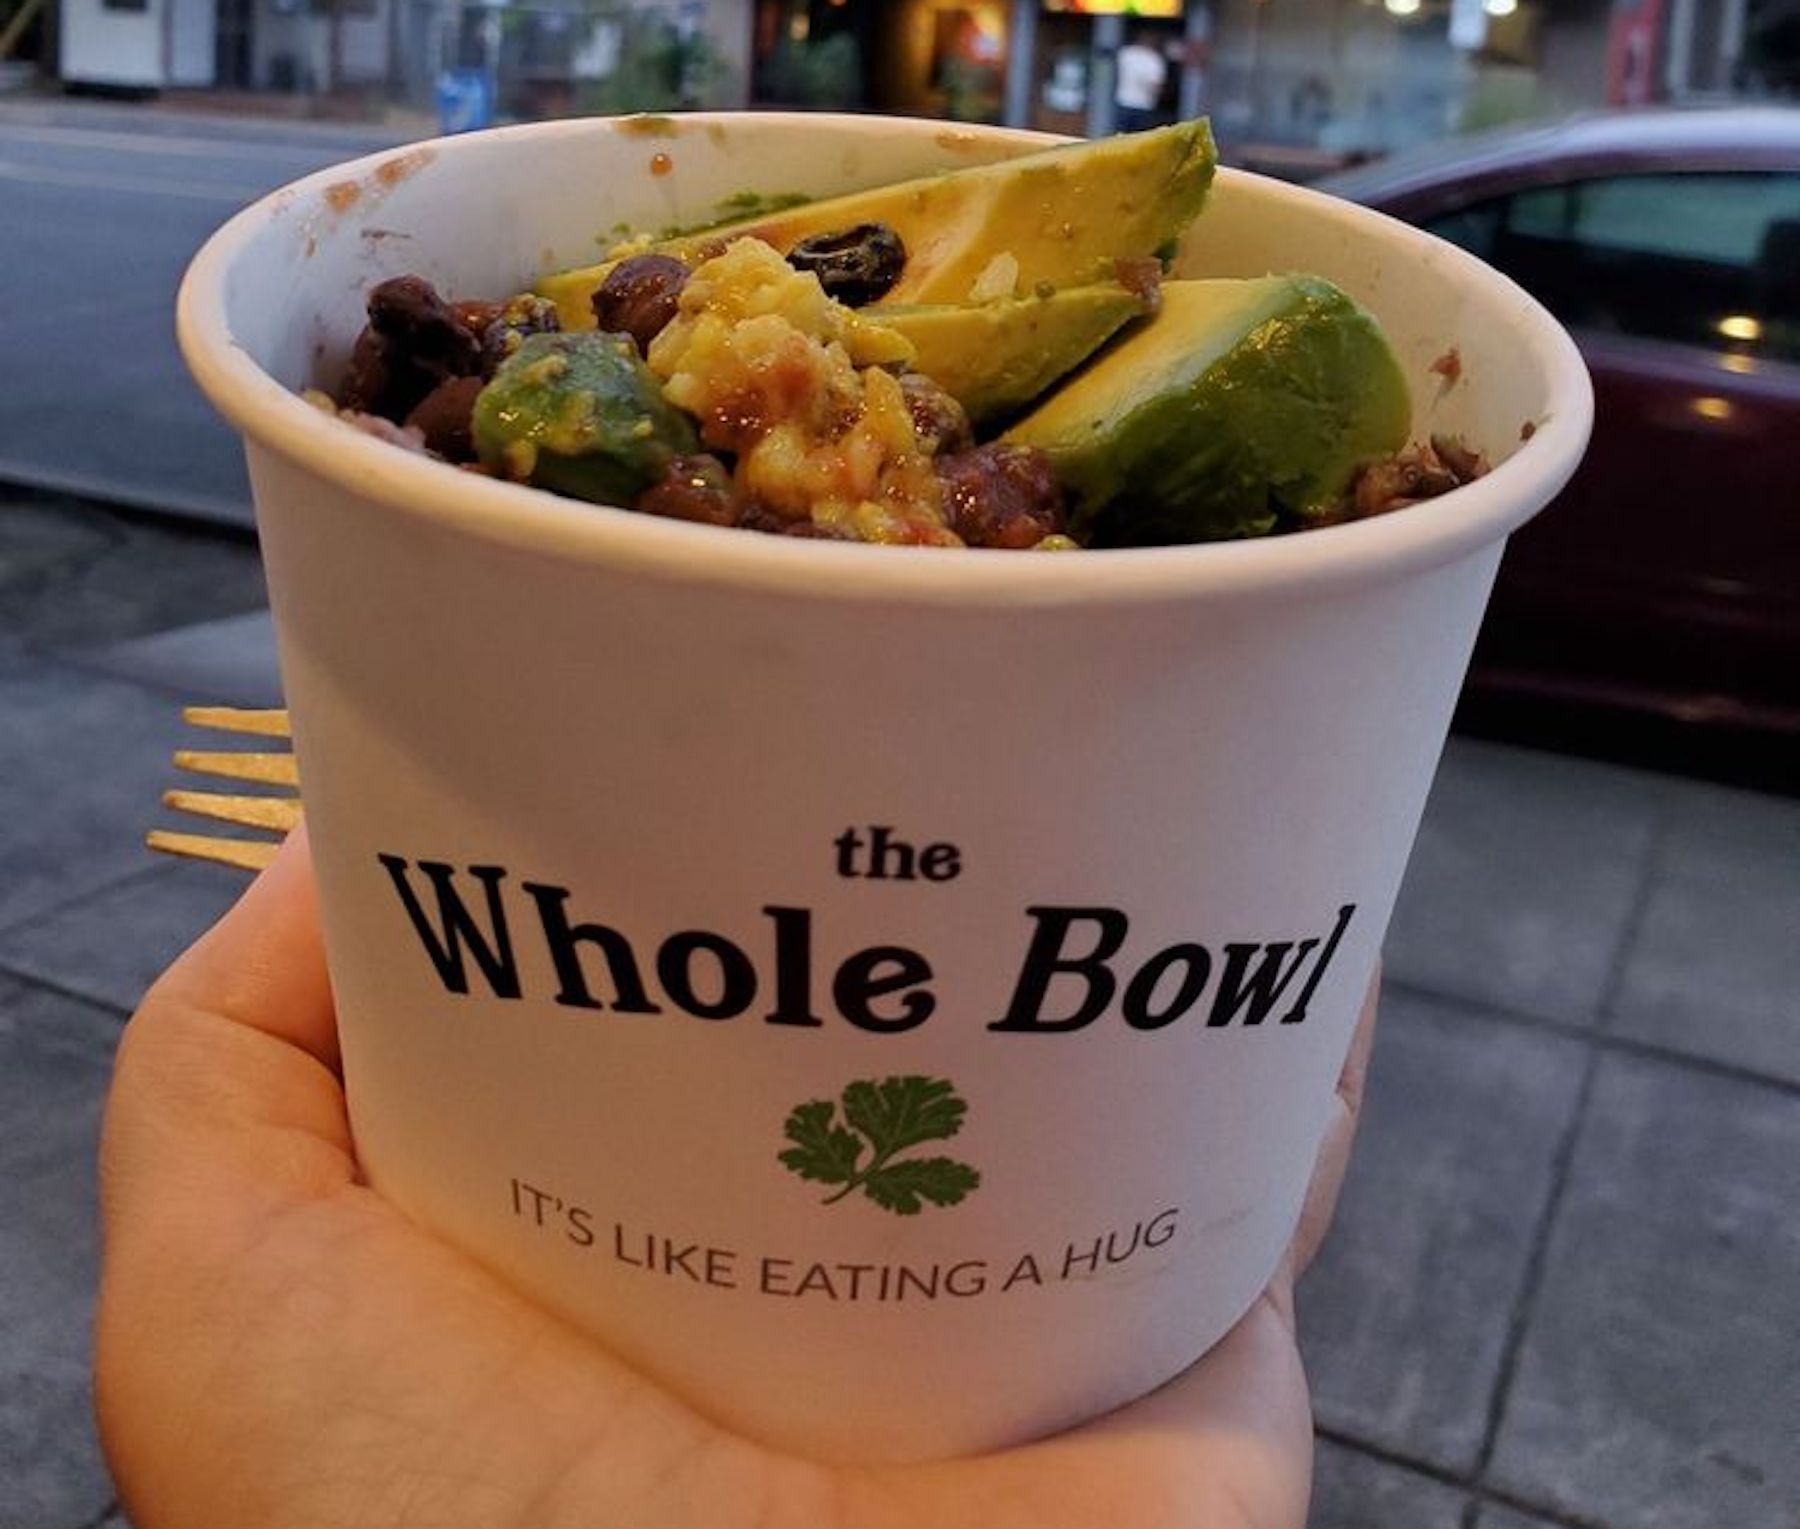 Person holding paper Whole Bowl cup that reads "Like Eating a Hug," filled with avocado, black beans, and other vegetarian ingredients.